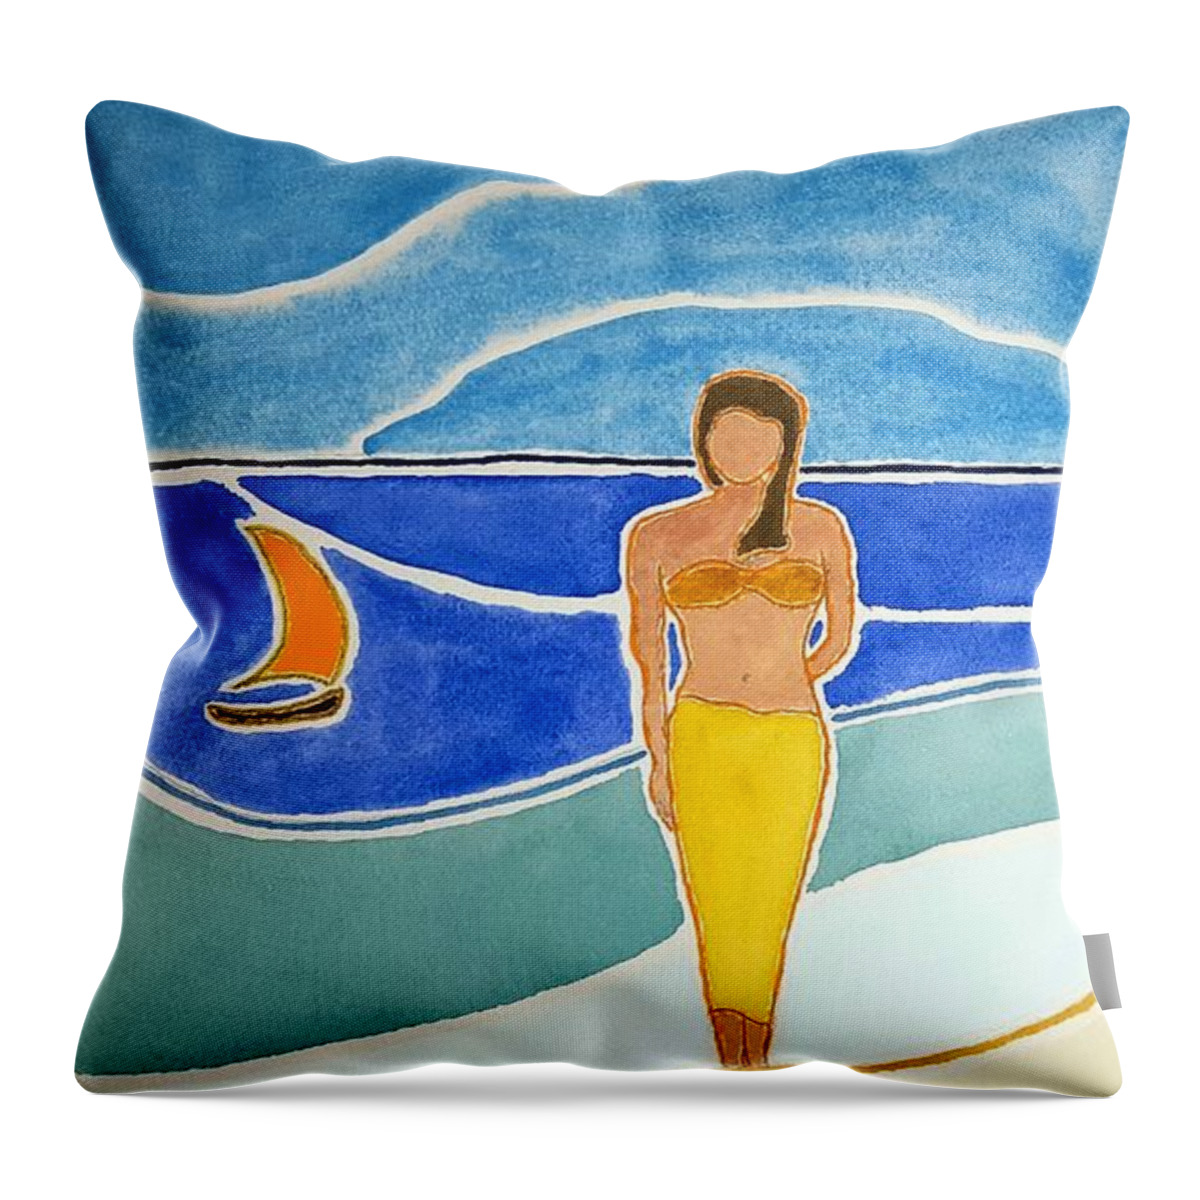 Watercolor Throw Pillow featuring the painting Tahitian Shore by John Klobucher